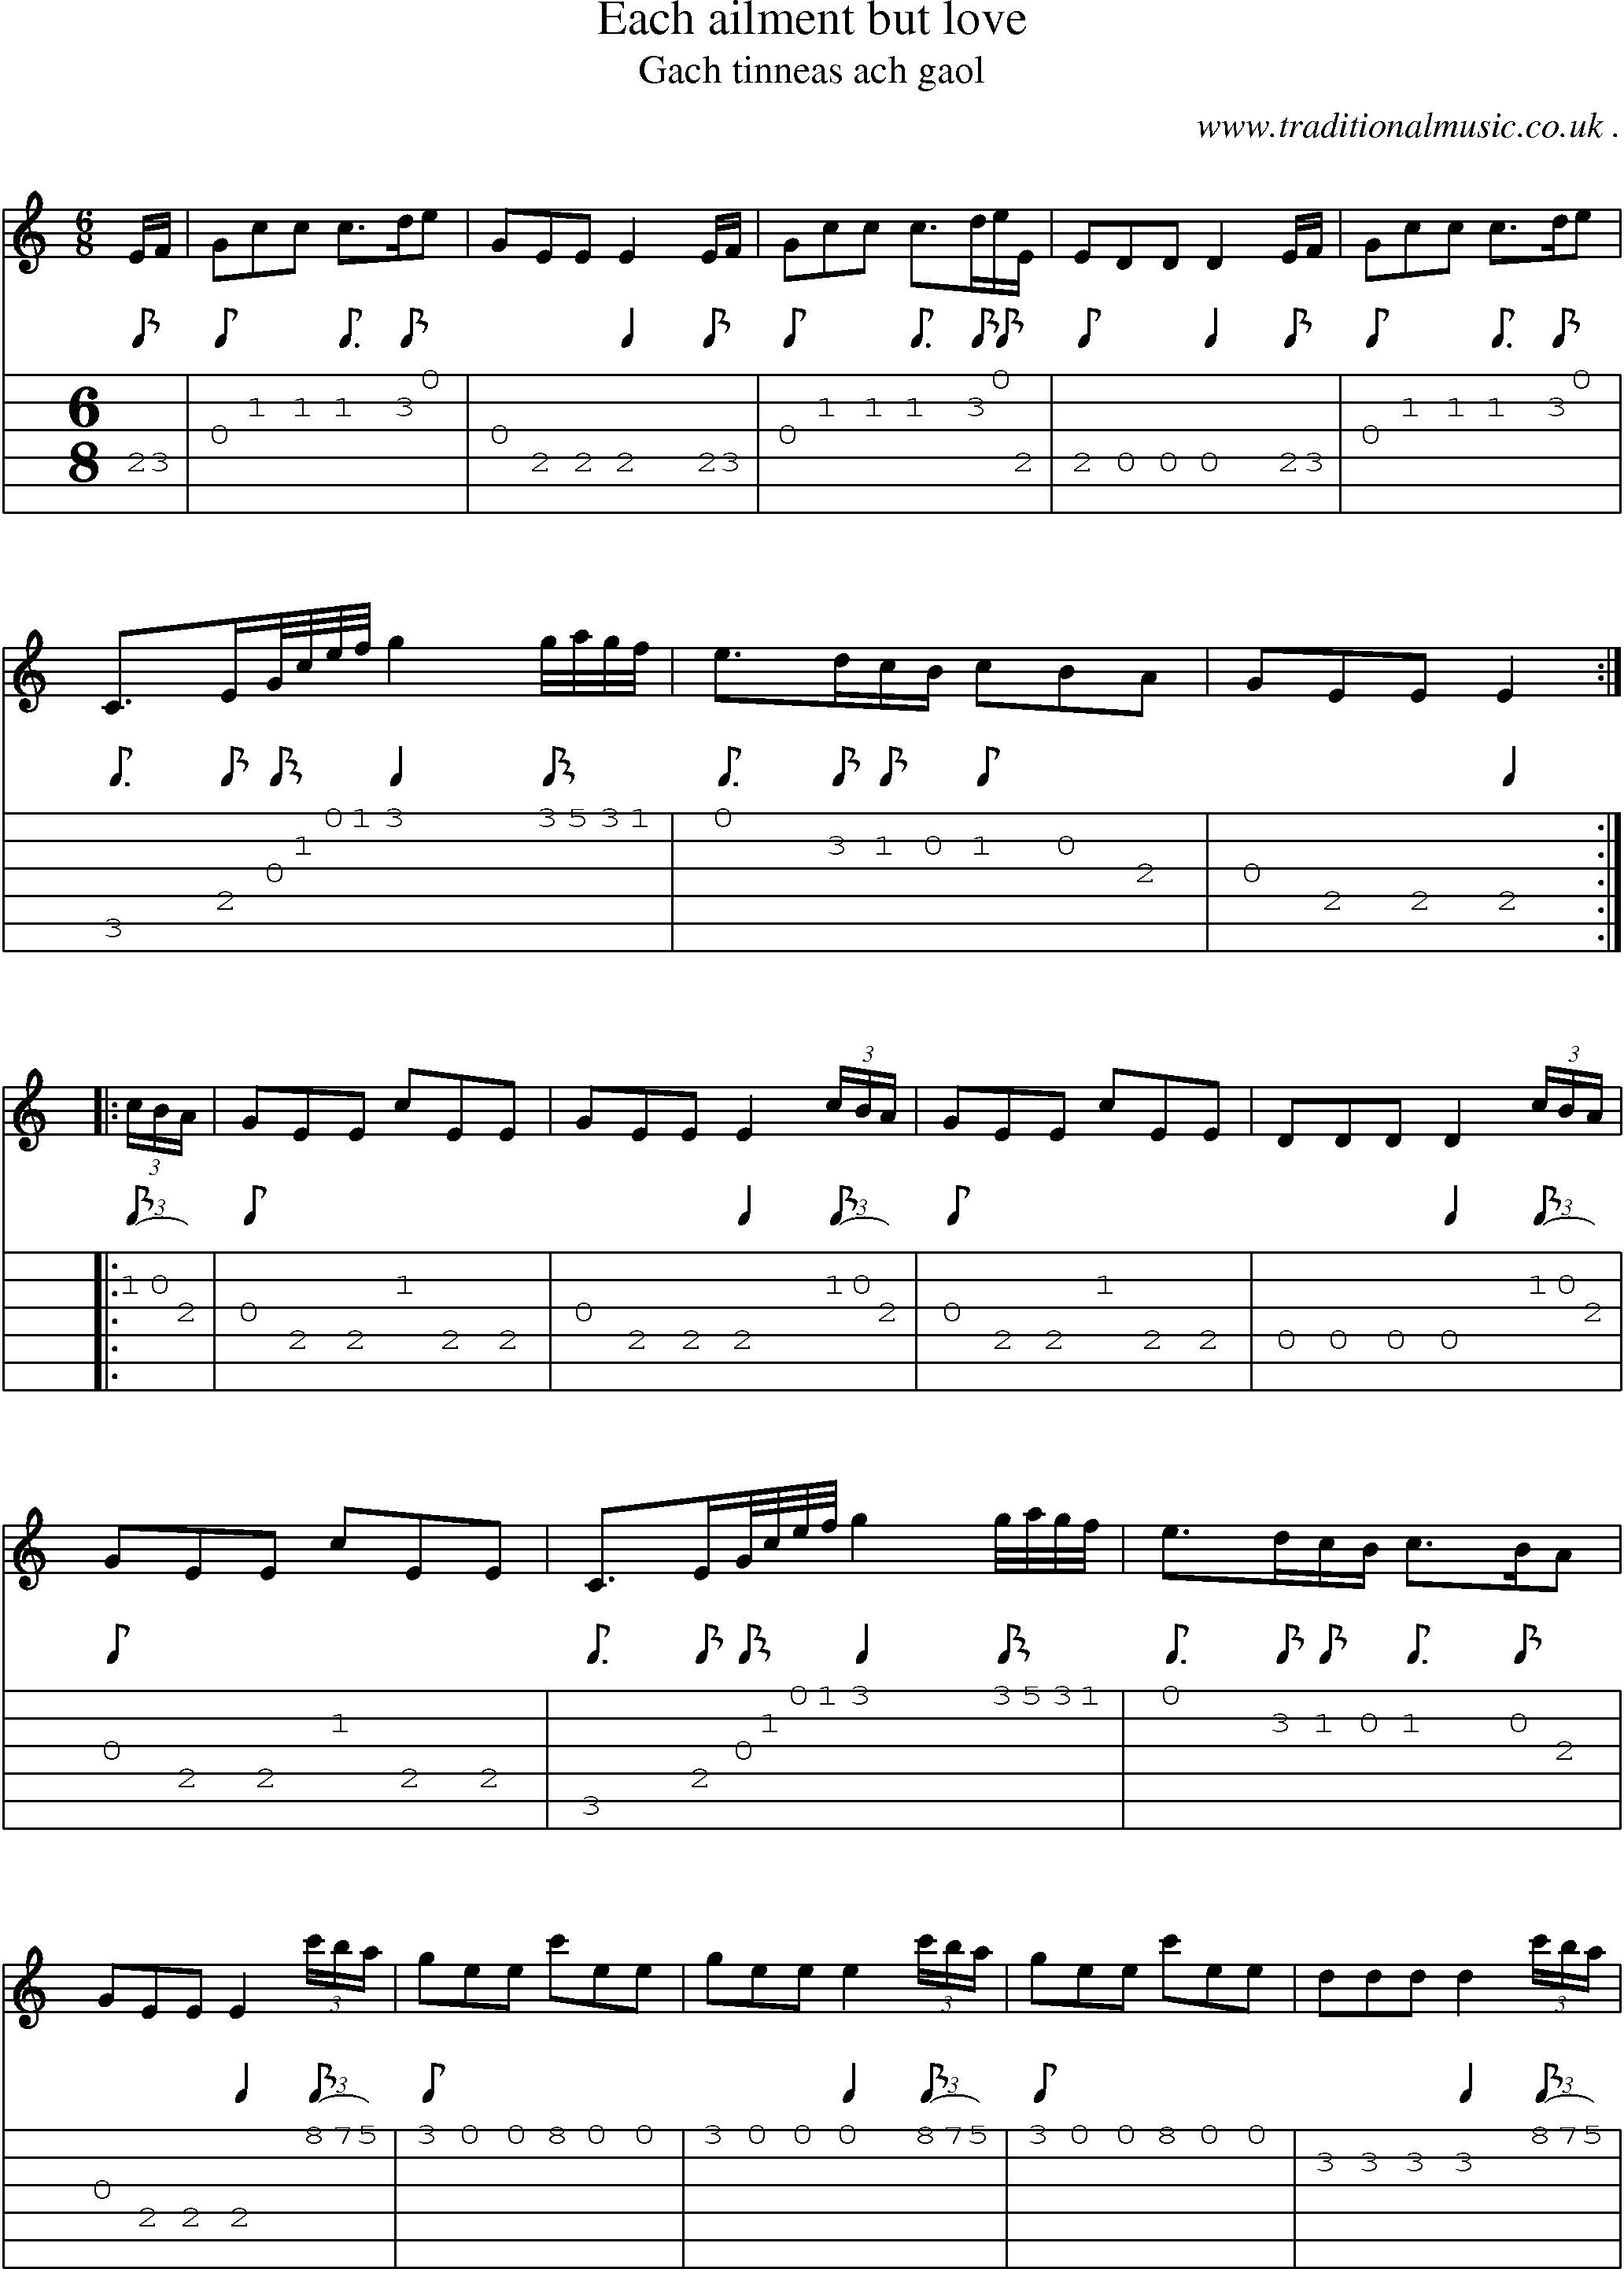 Sheet-music  score, Chords and Guitar Tabs for Each Ailment But Love